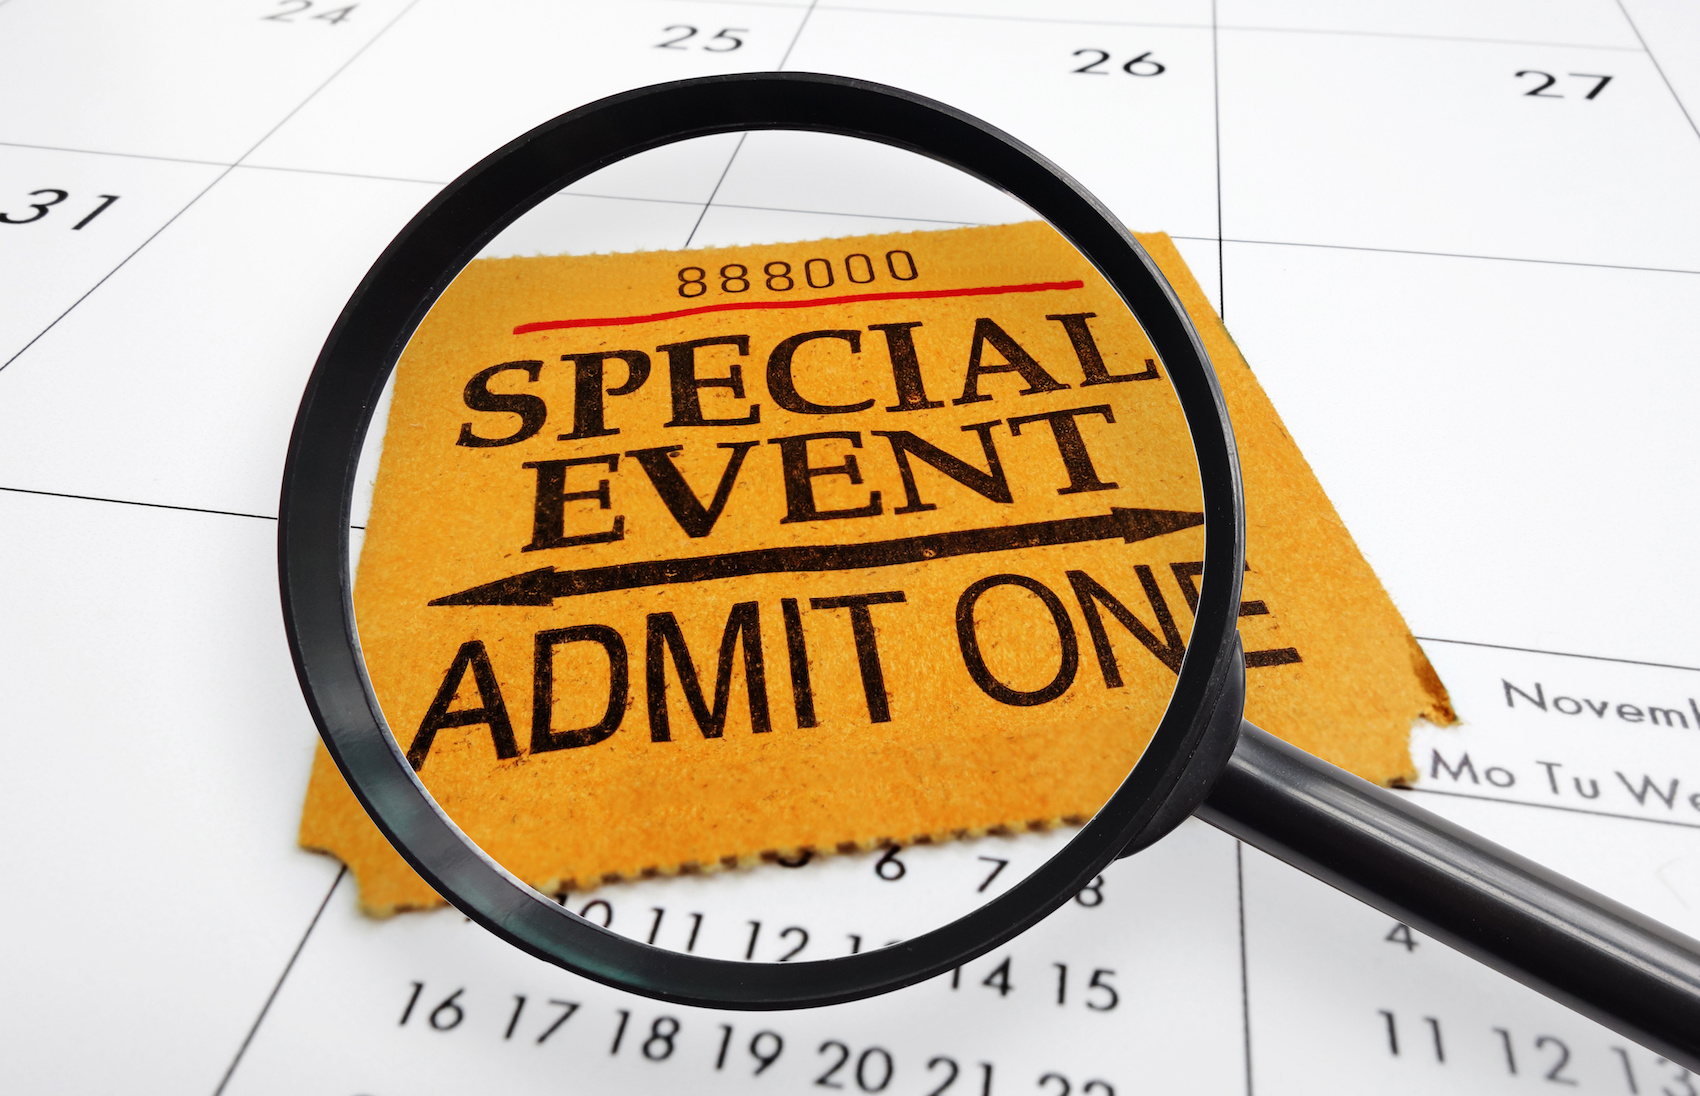 Special Event Liability Insurance - ALIGNED Insurance brokers